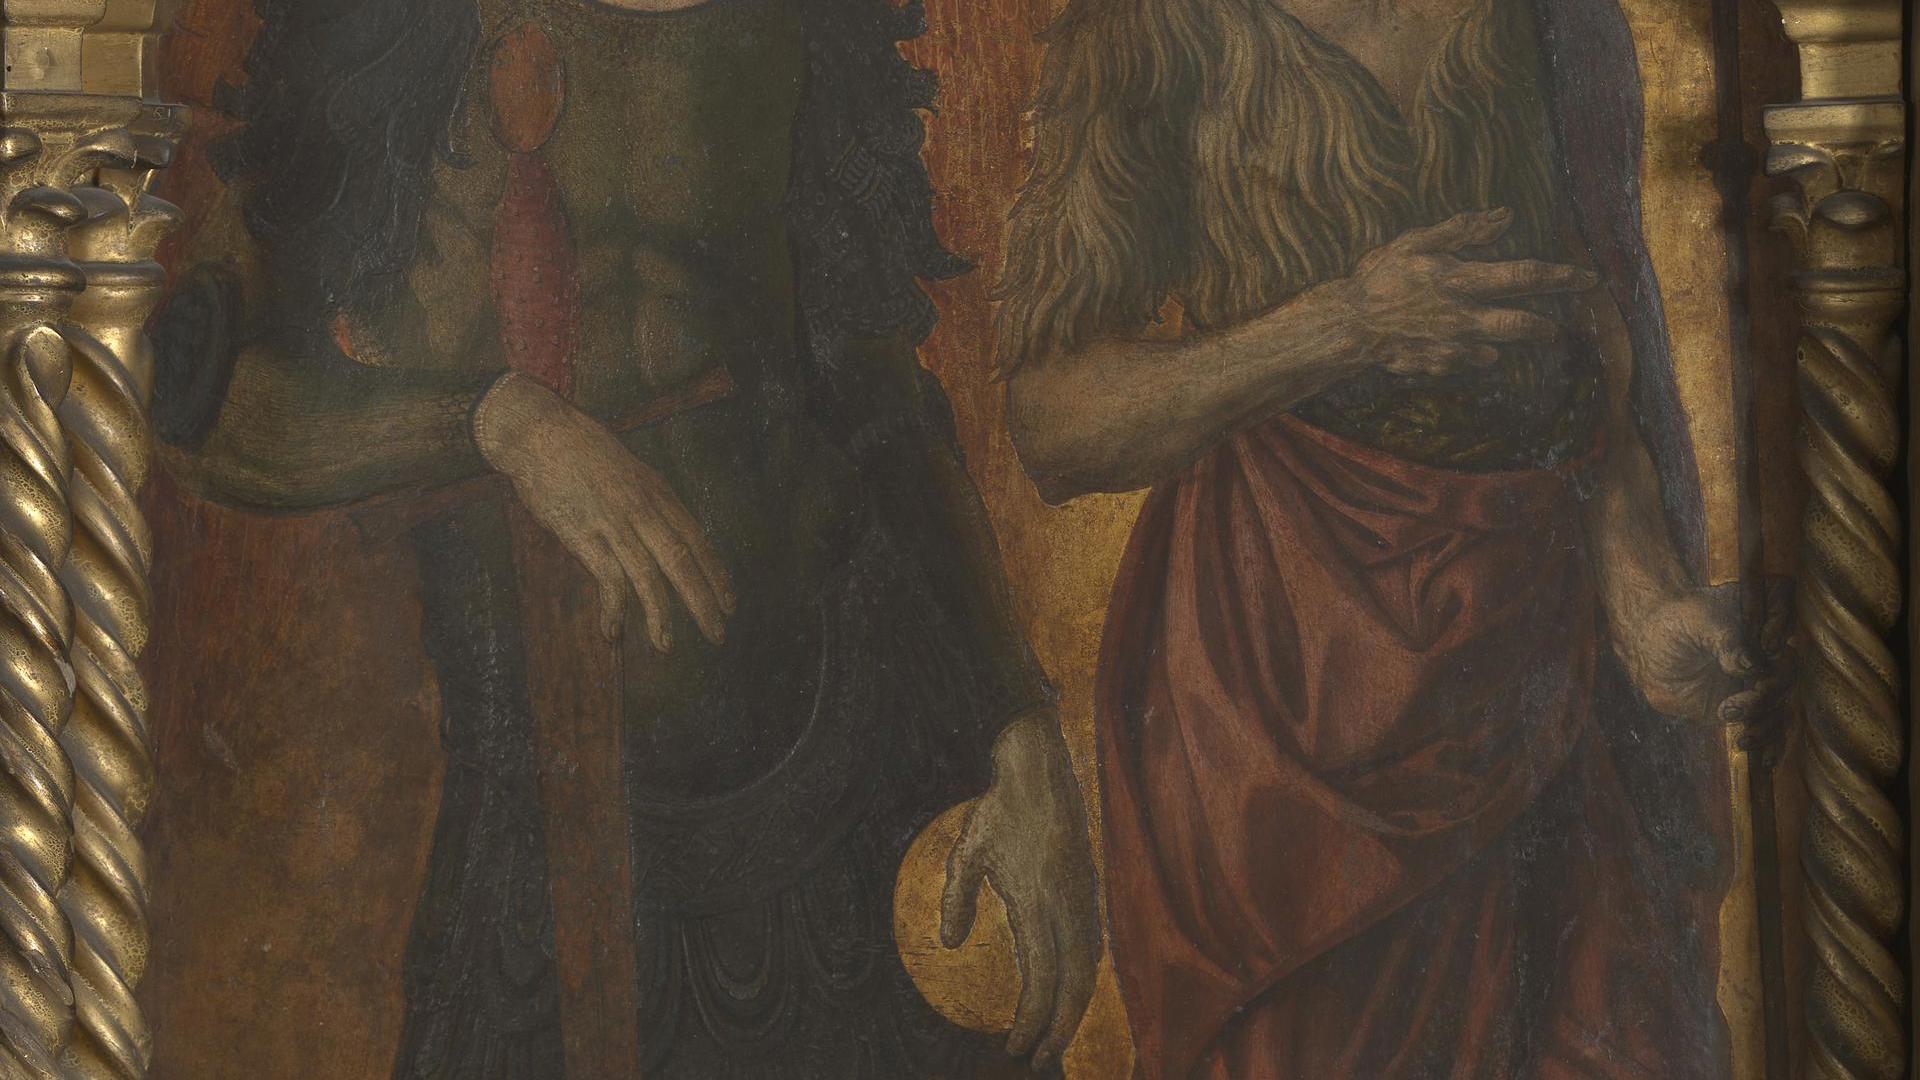 Saints Michael and John the Baptist by Probably by Jacopo di Antonio (Master of Pratovecchio?)